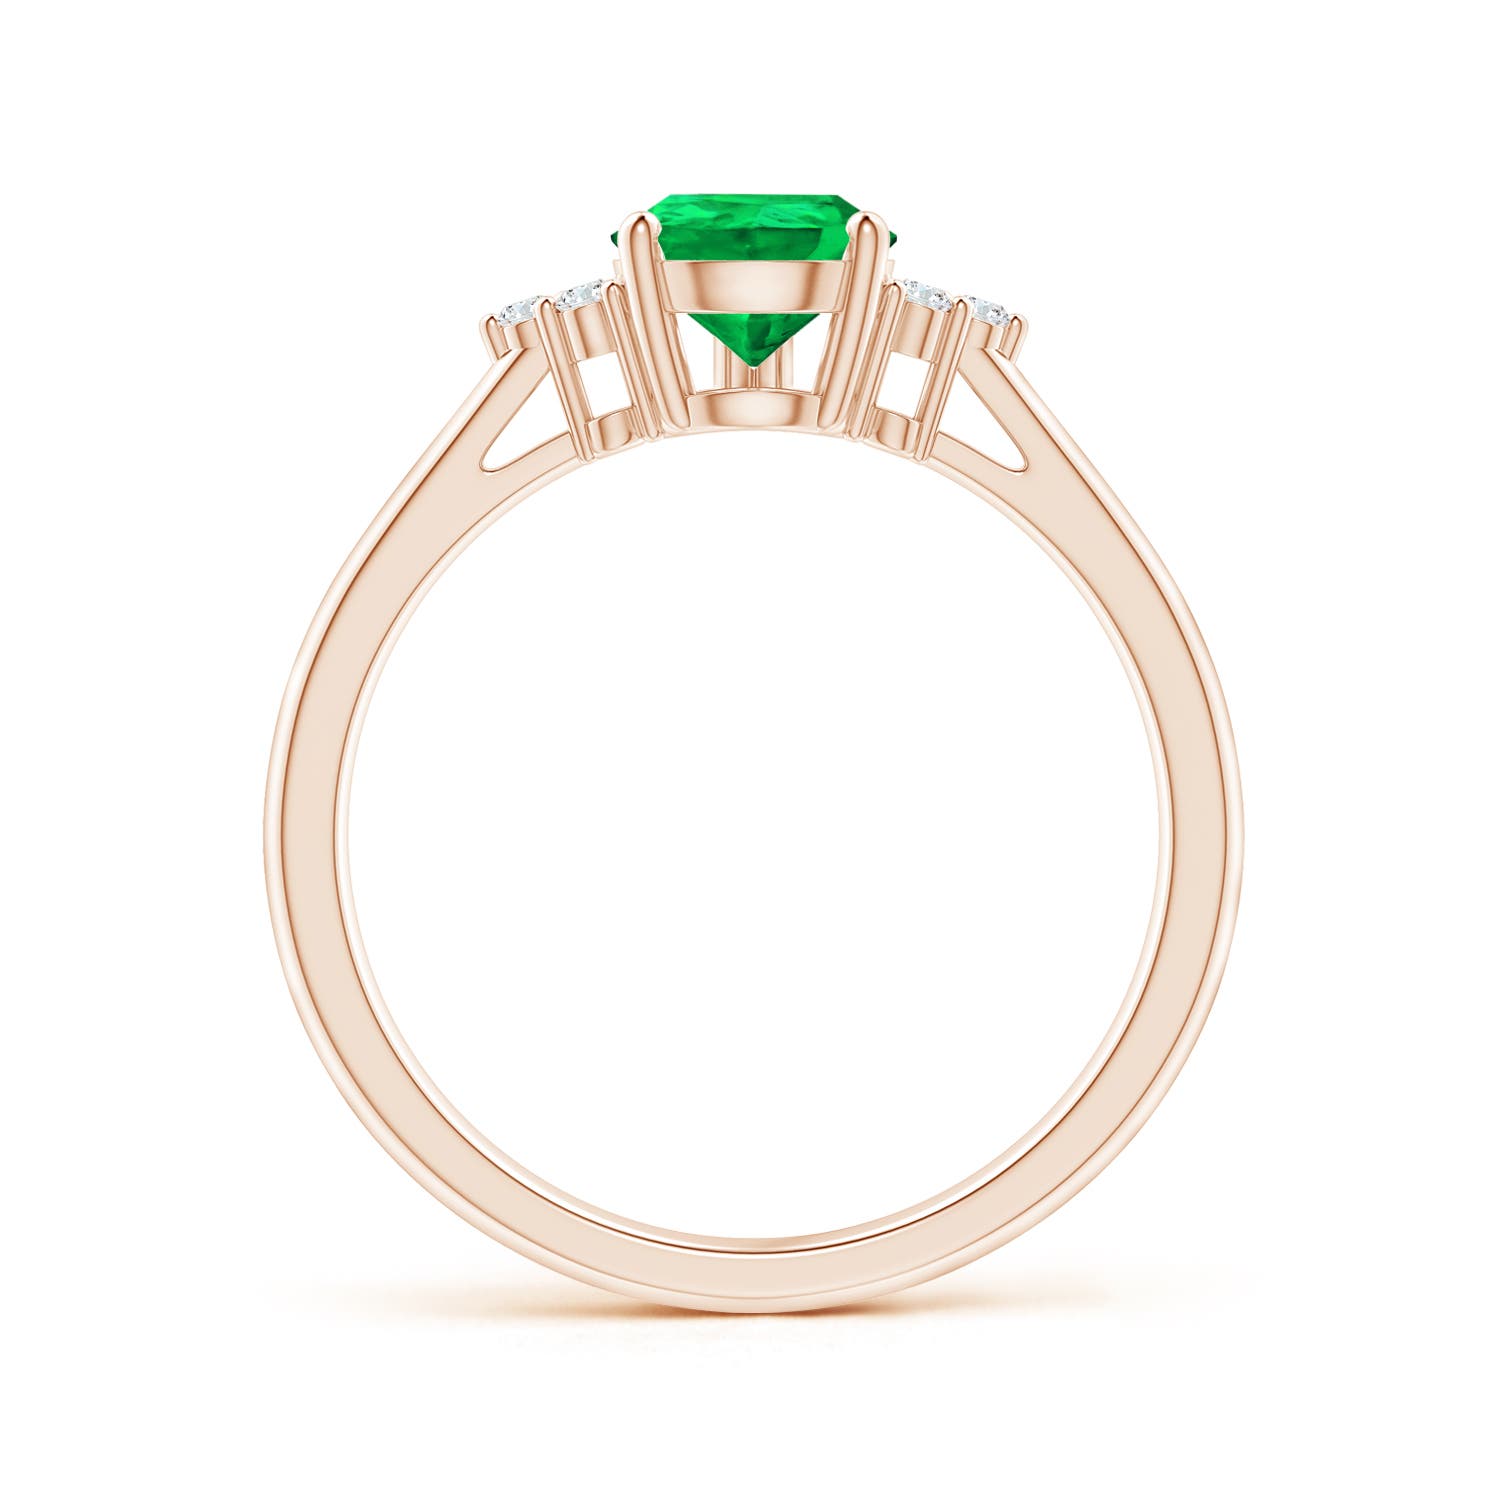 AAA - Emerald / 1.02 CT / 14 KT Rose Gold